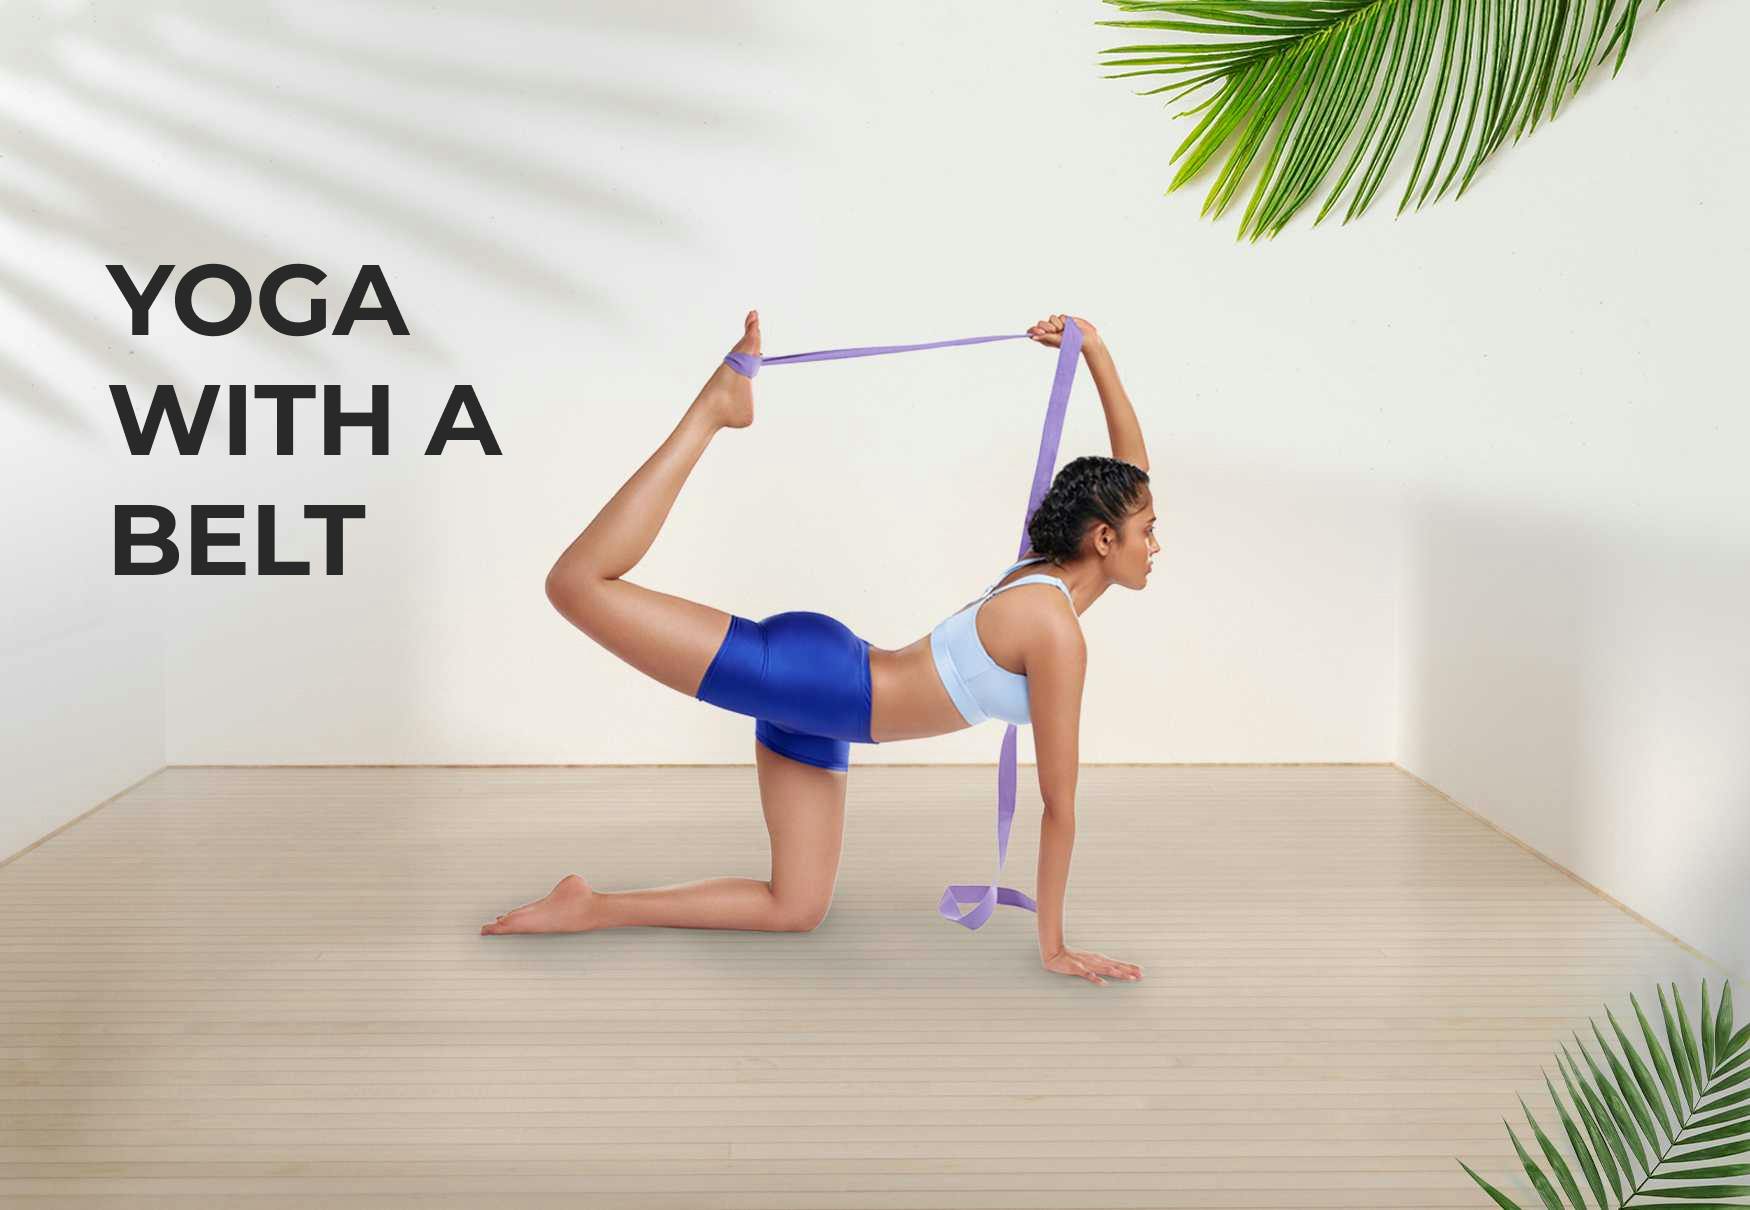 YOGA WITH A BELT